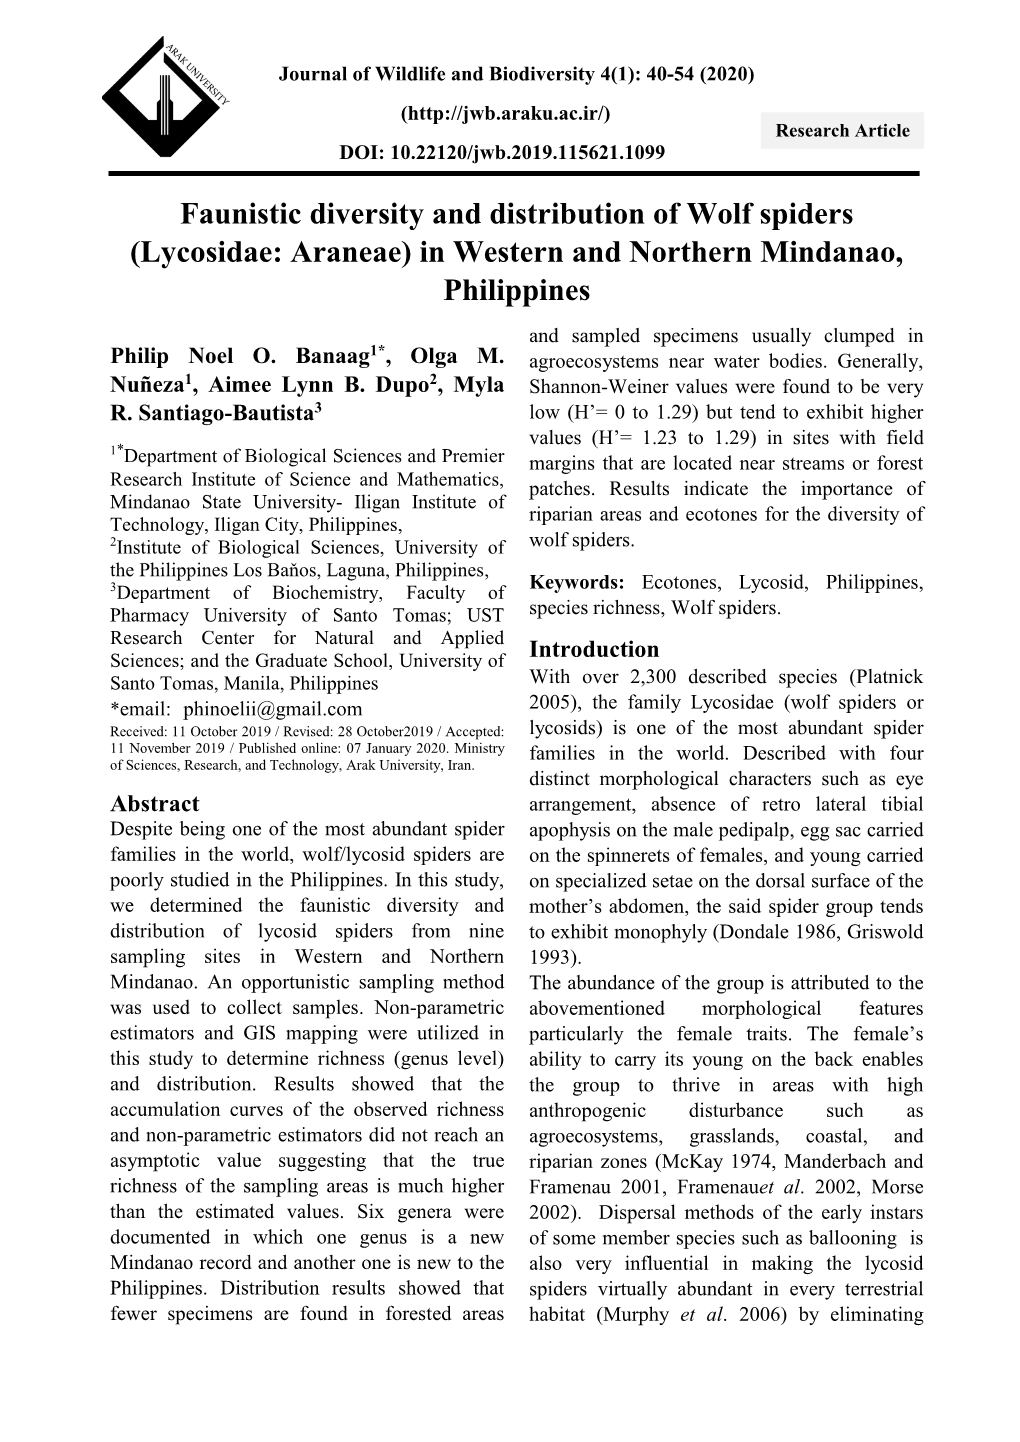 Faunistic Diversity and Distribution of Wolf Spiders (Lycosidae: Araneae) in Western and Northern Mindanao, Philippines